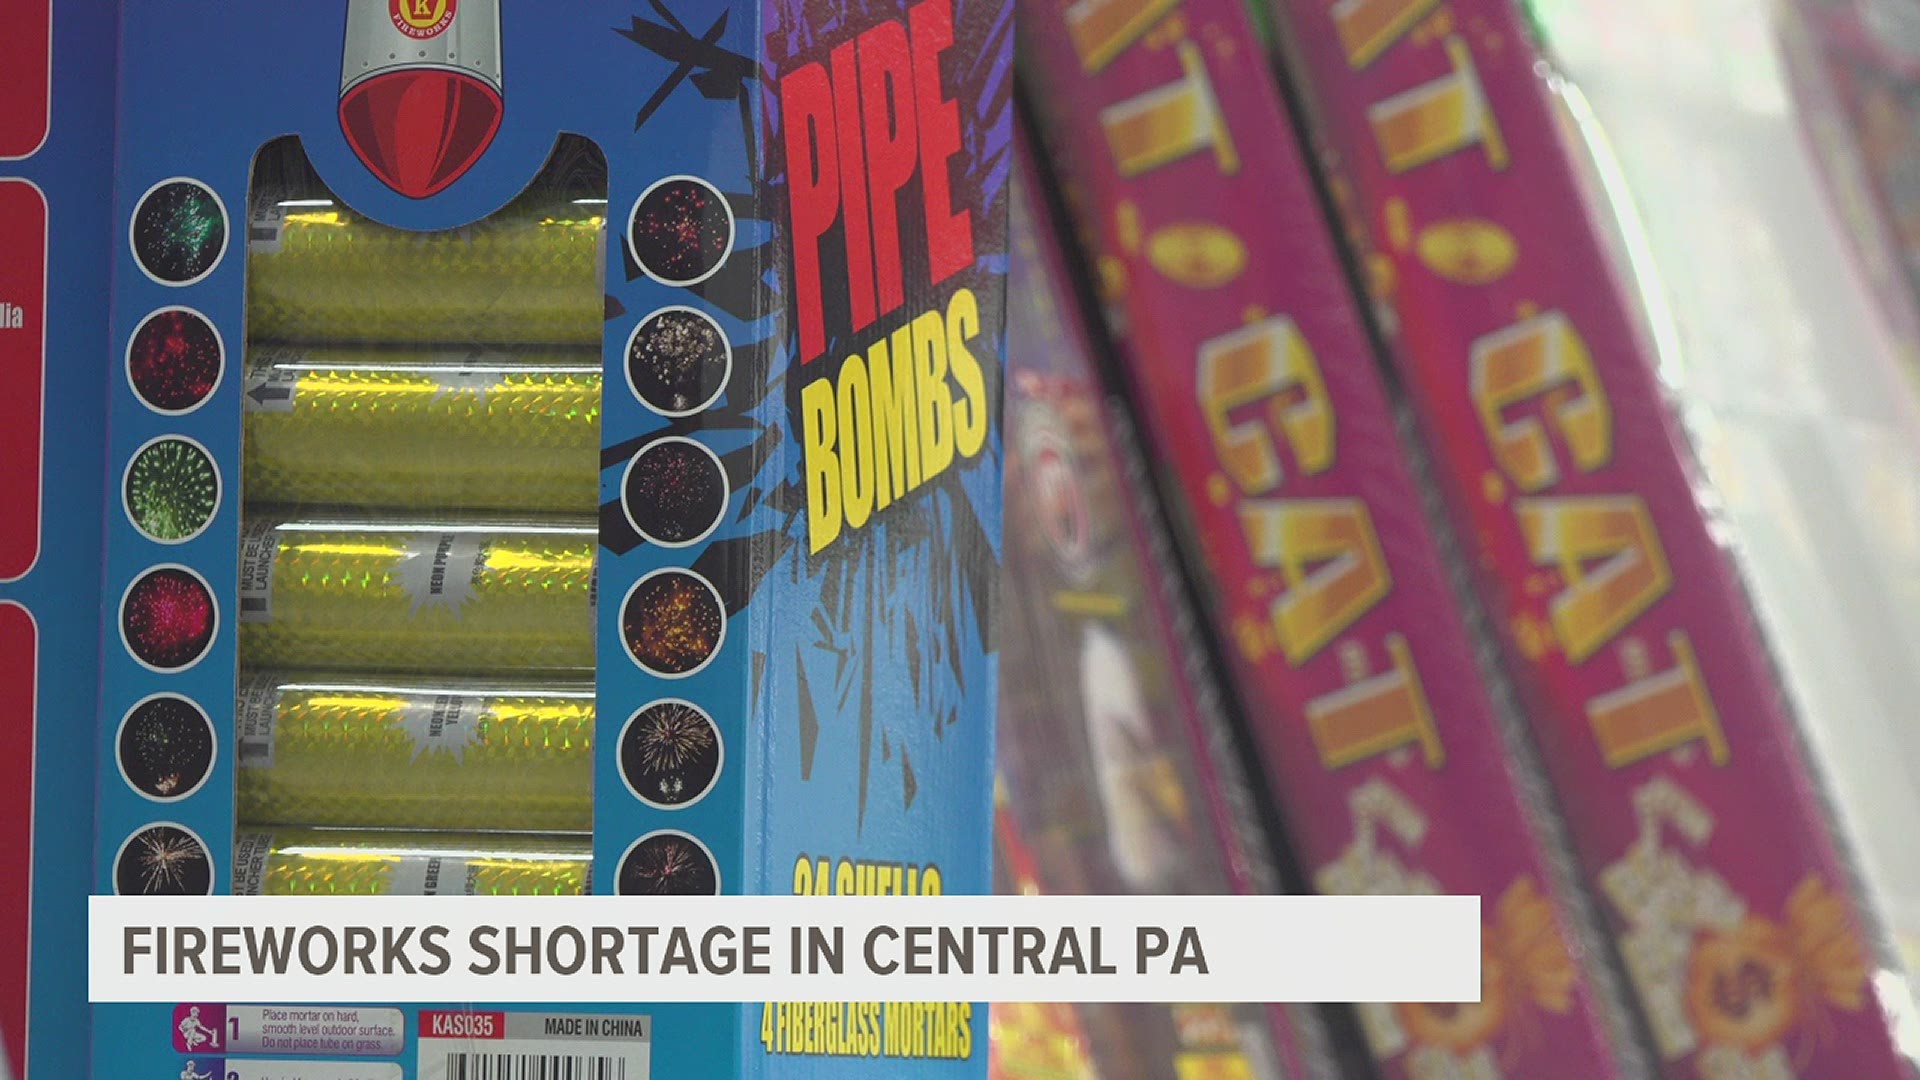 Last year, fireworks stores saw a spike in sales and demand due to cancellations of events during the Fourth of July and Labor Day weekends.